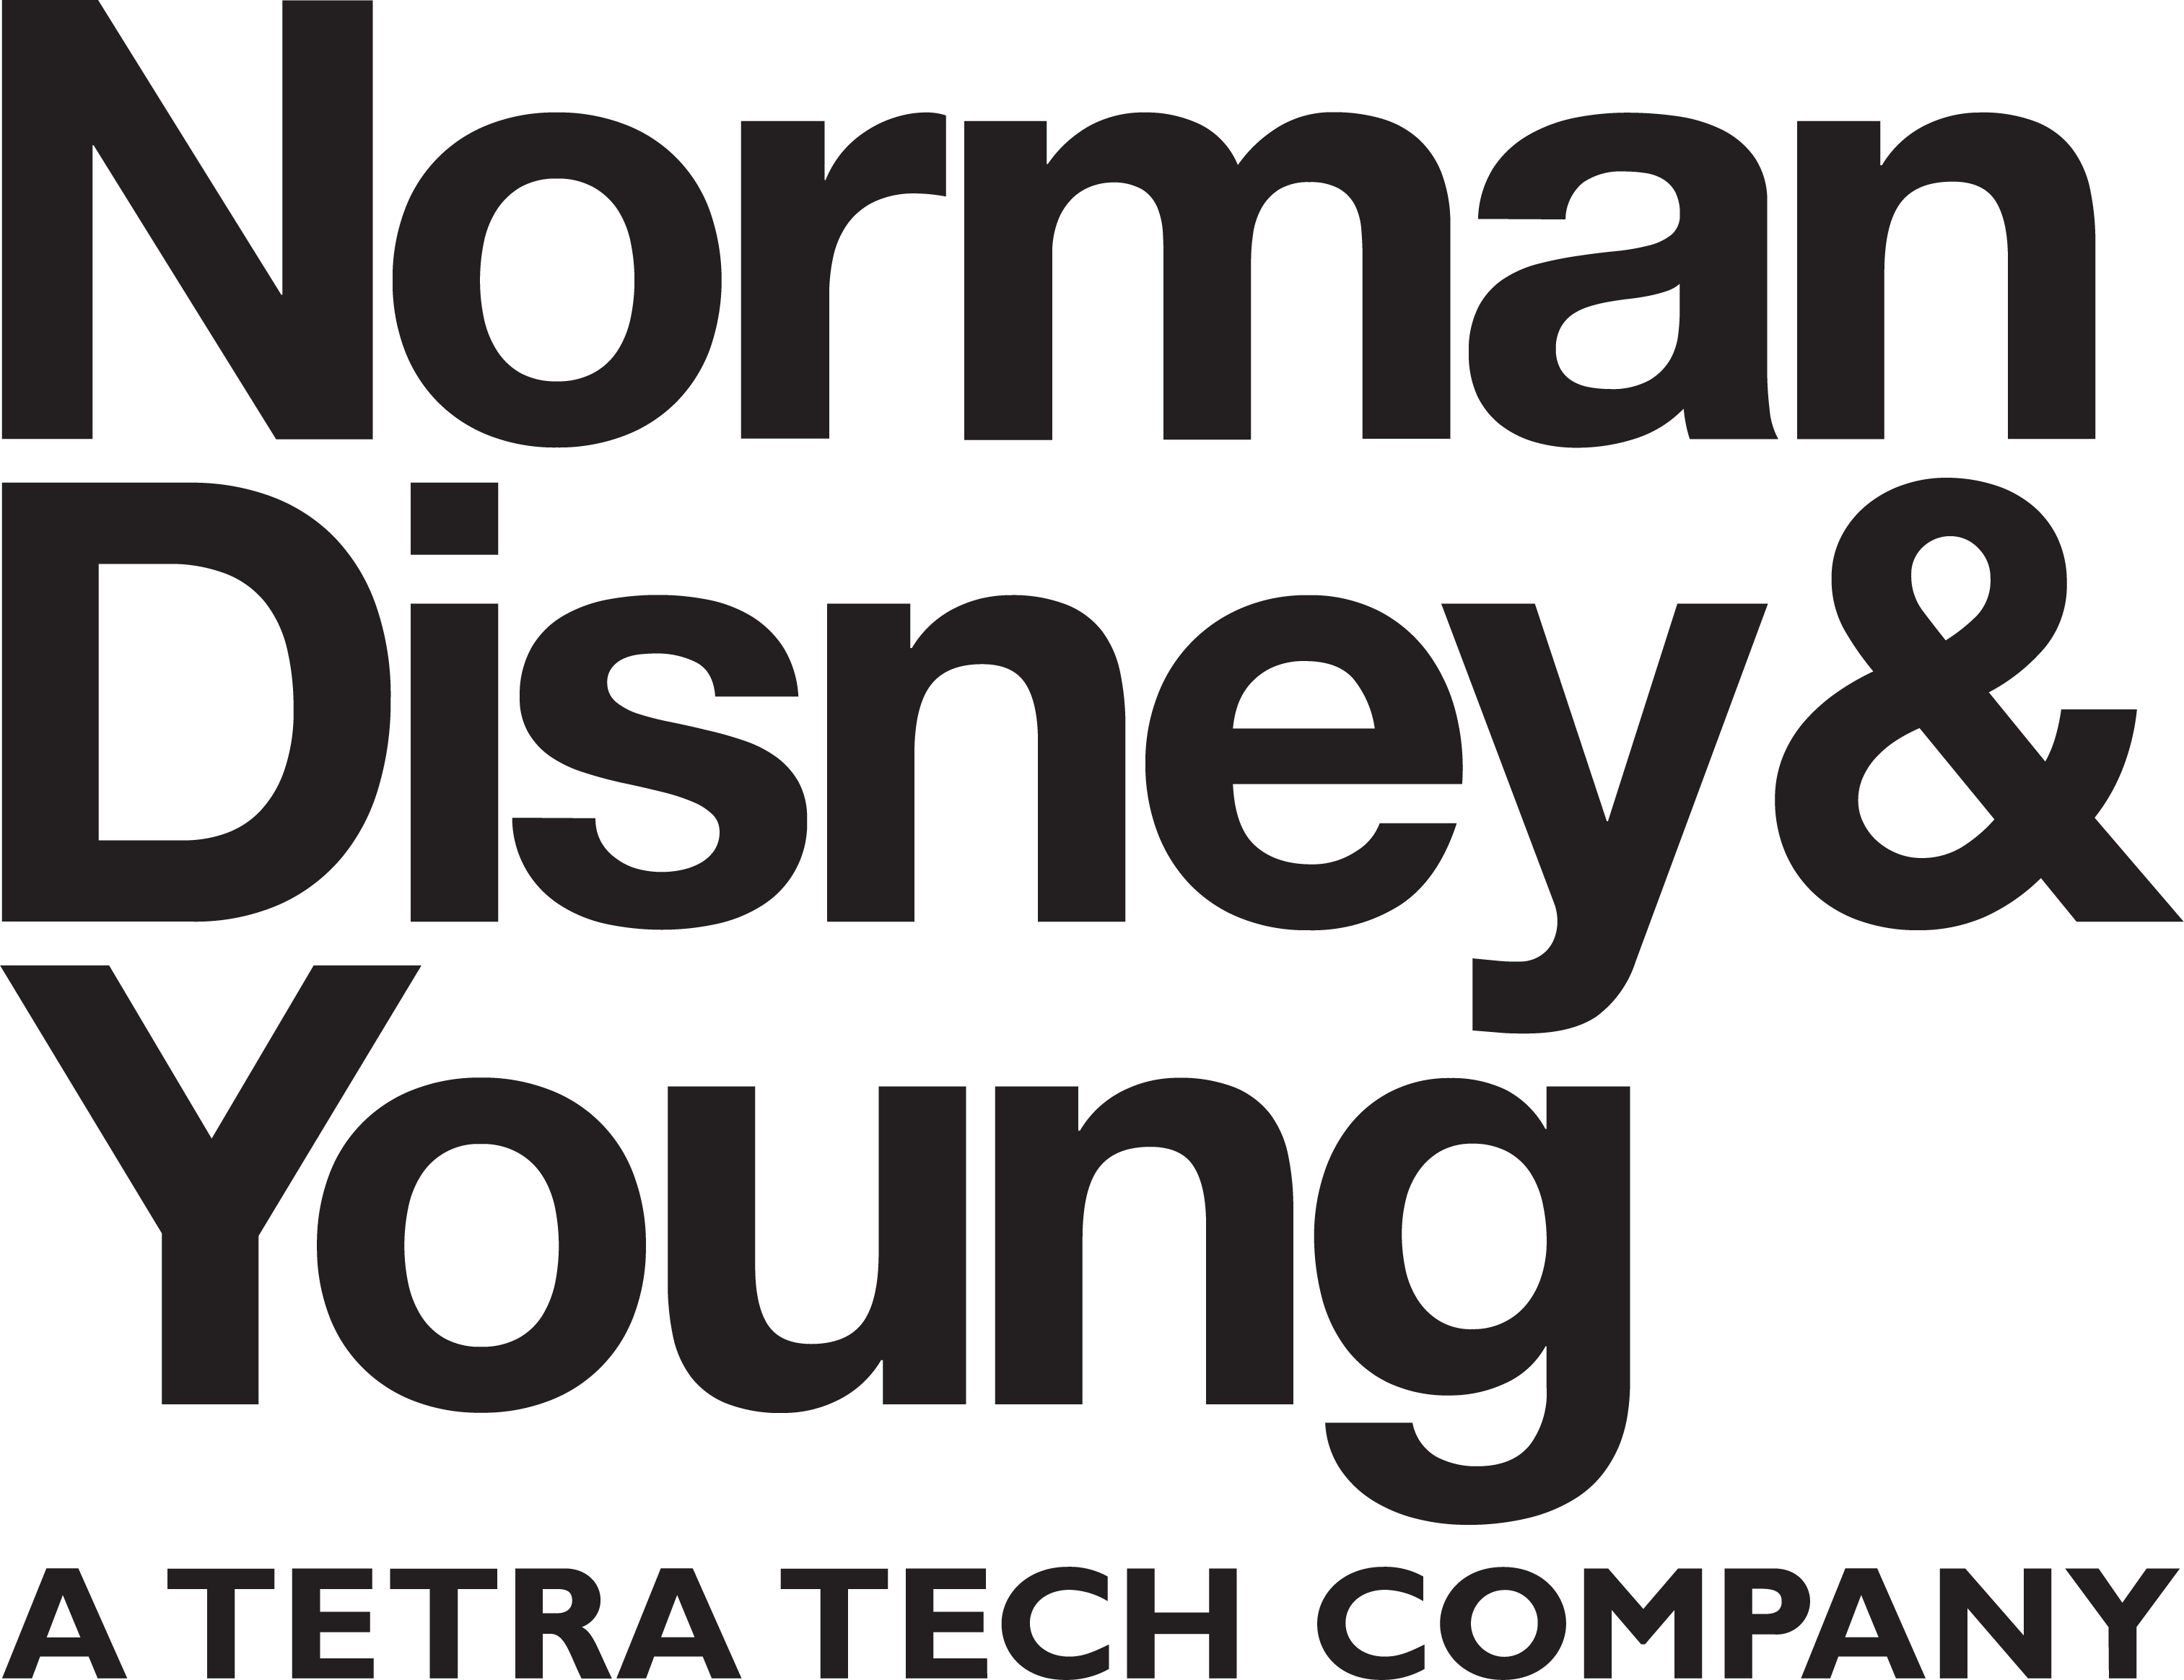 Norman Disney & Young